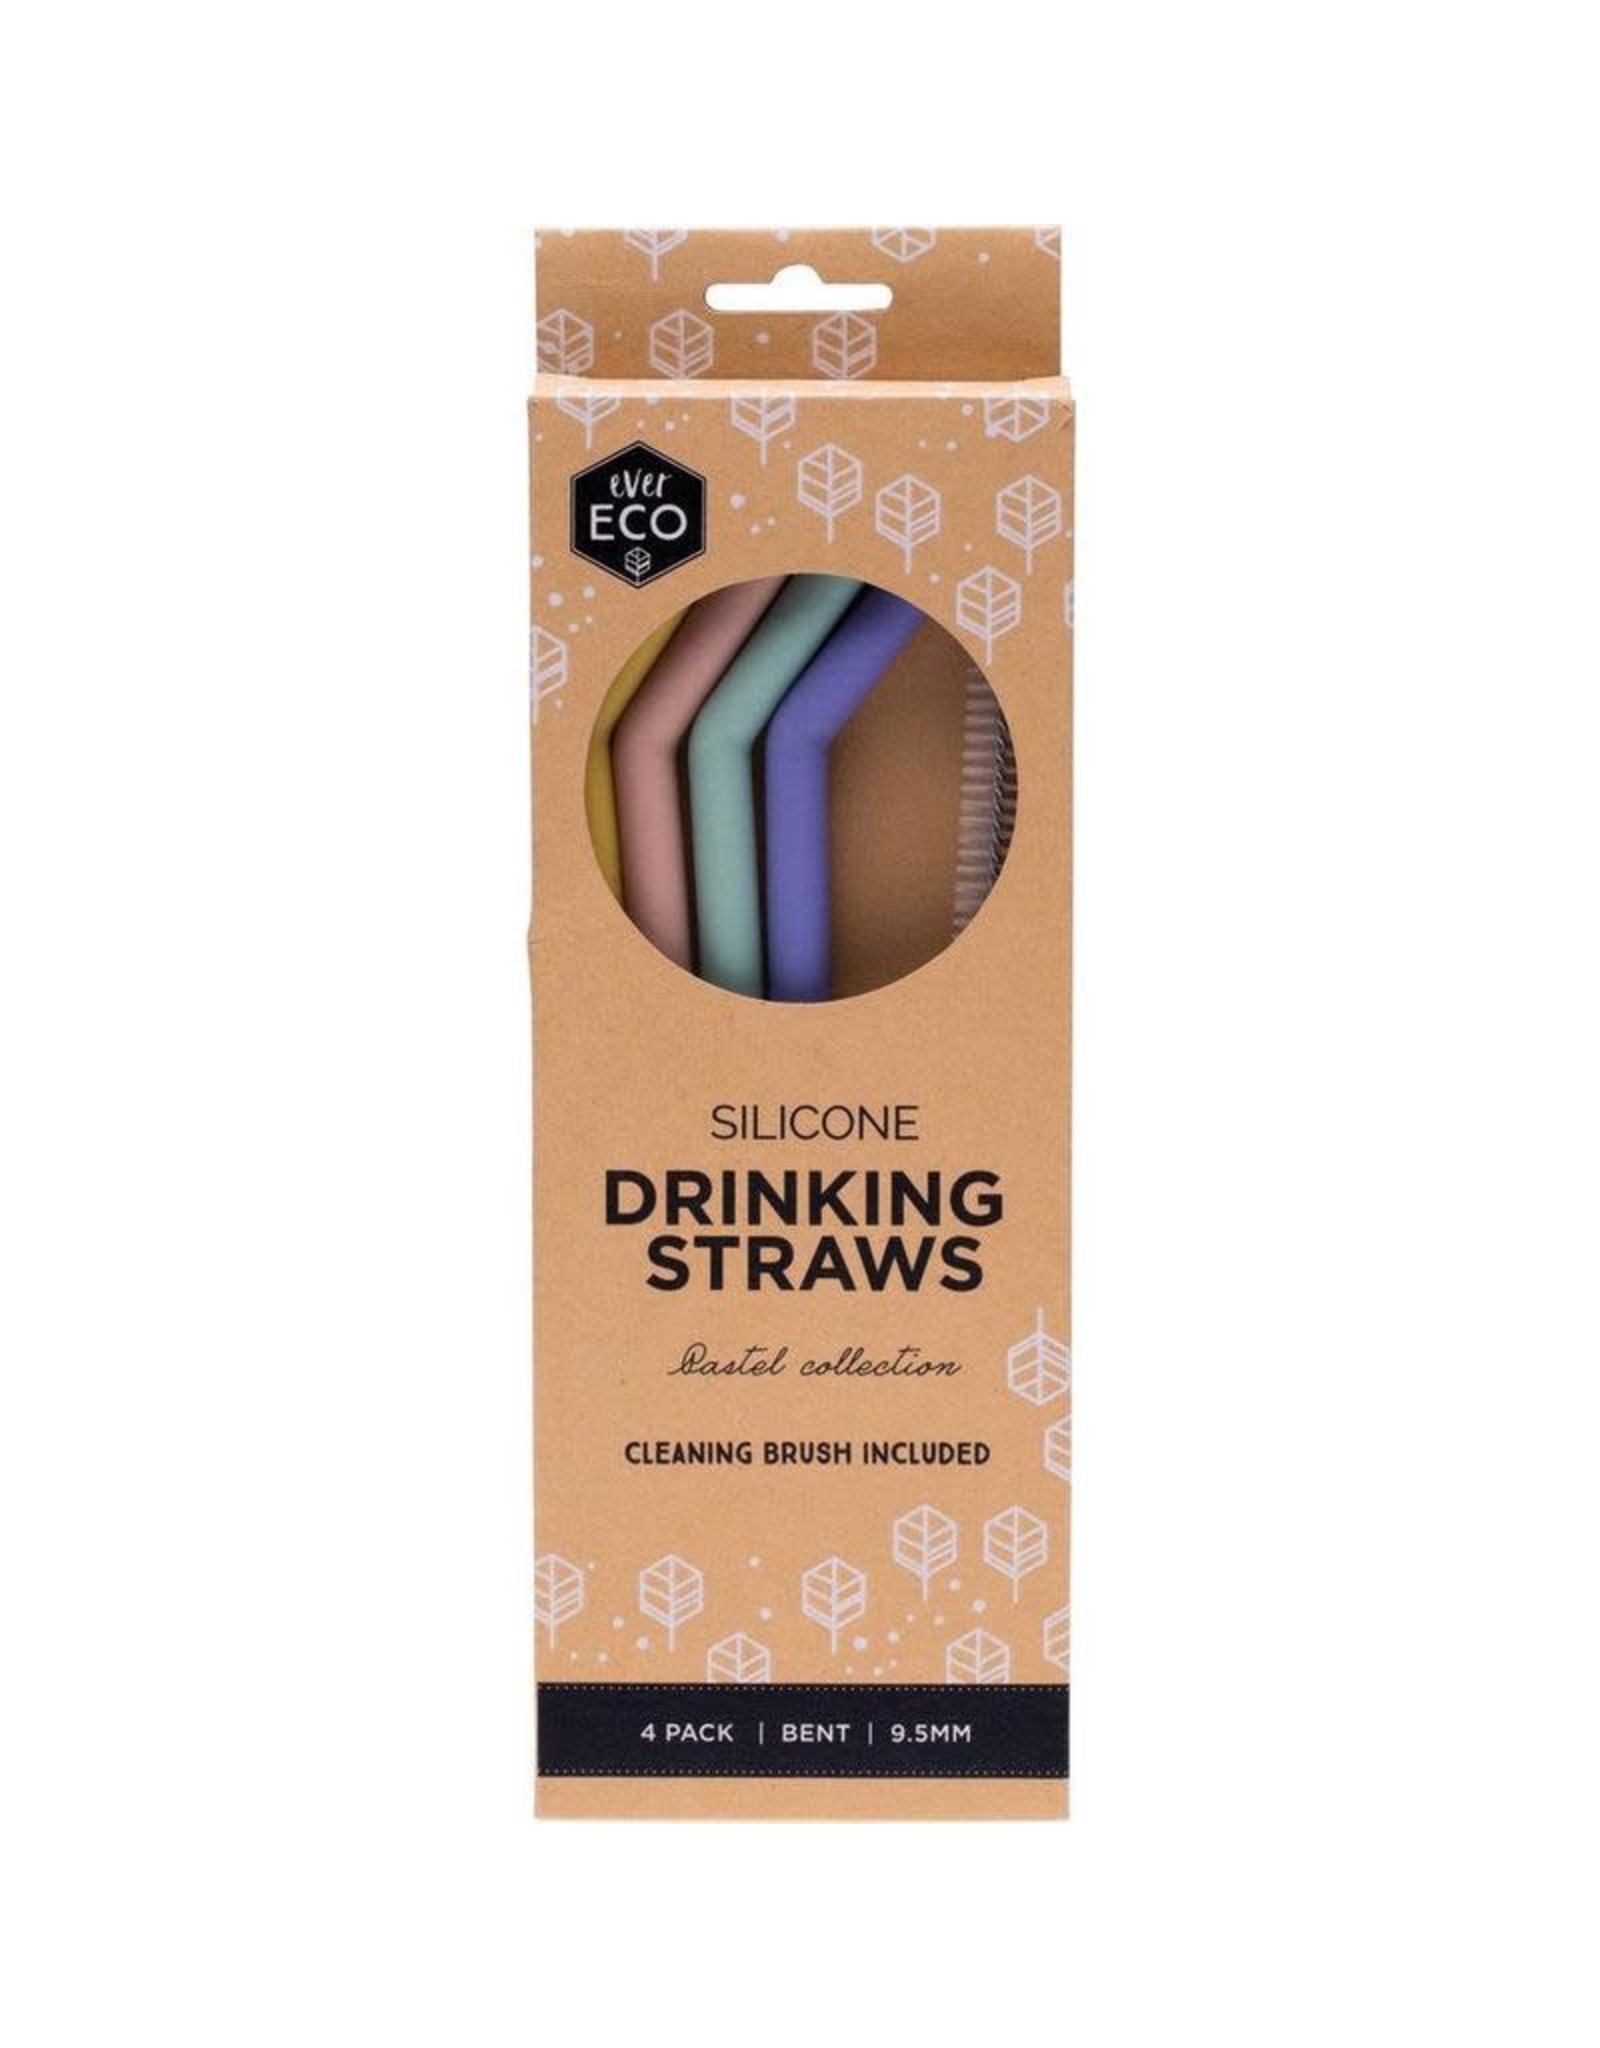 Ever Eco Silicone Drinking Straws Bent 4 pack